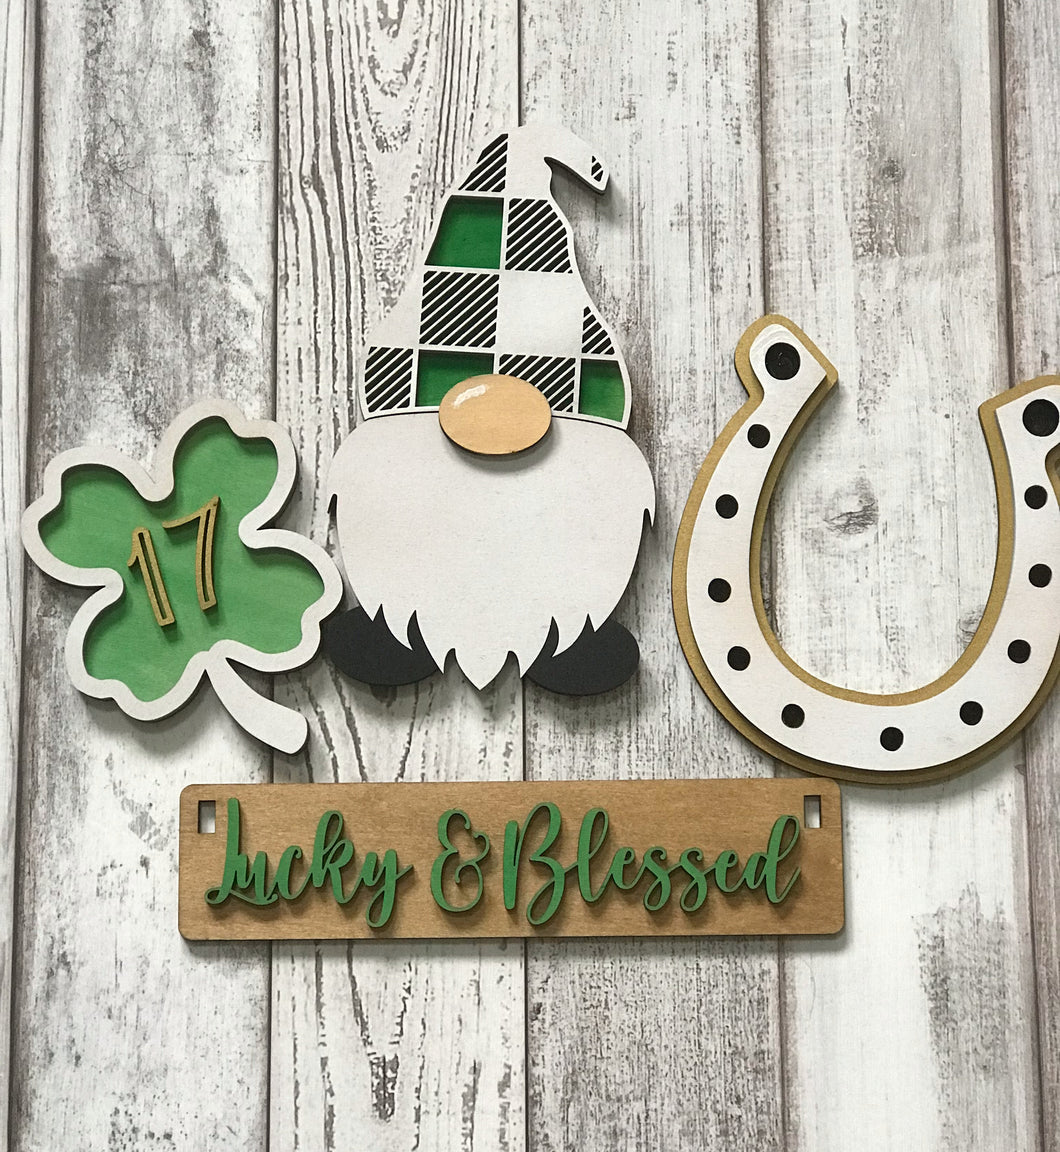 St. Patrick's Day Gnome Interchangeable Inserts (for Wagon or Shelf Sitter), unpainted